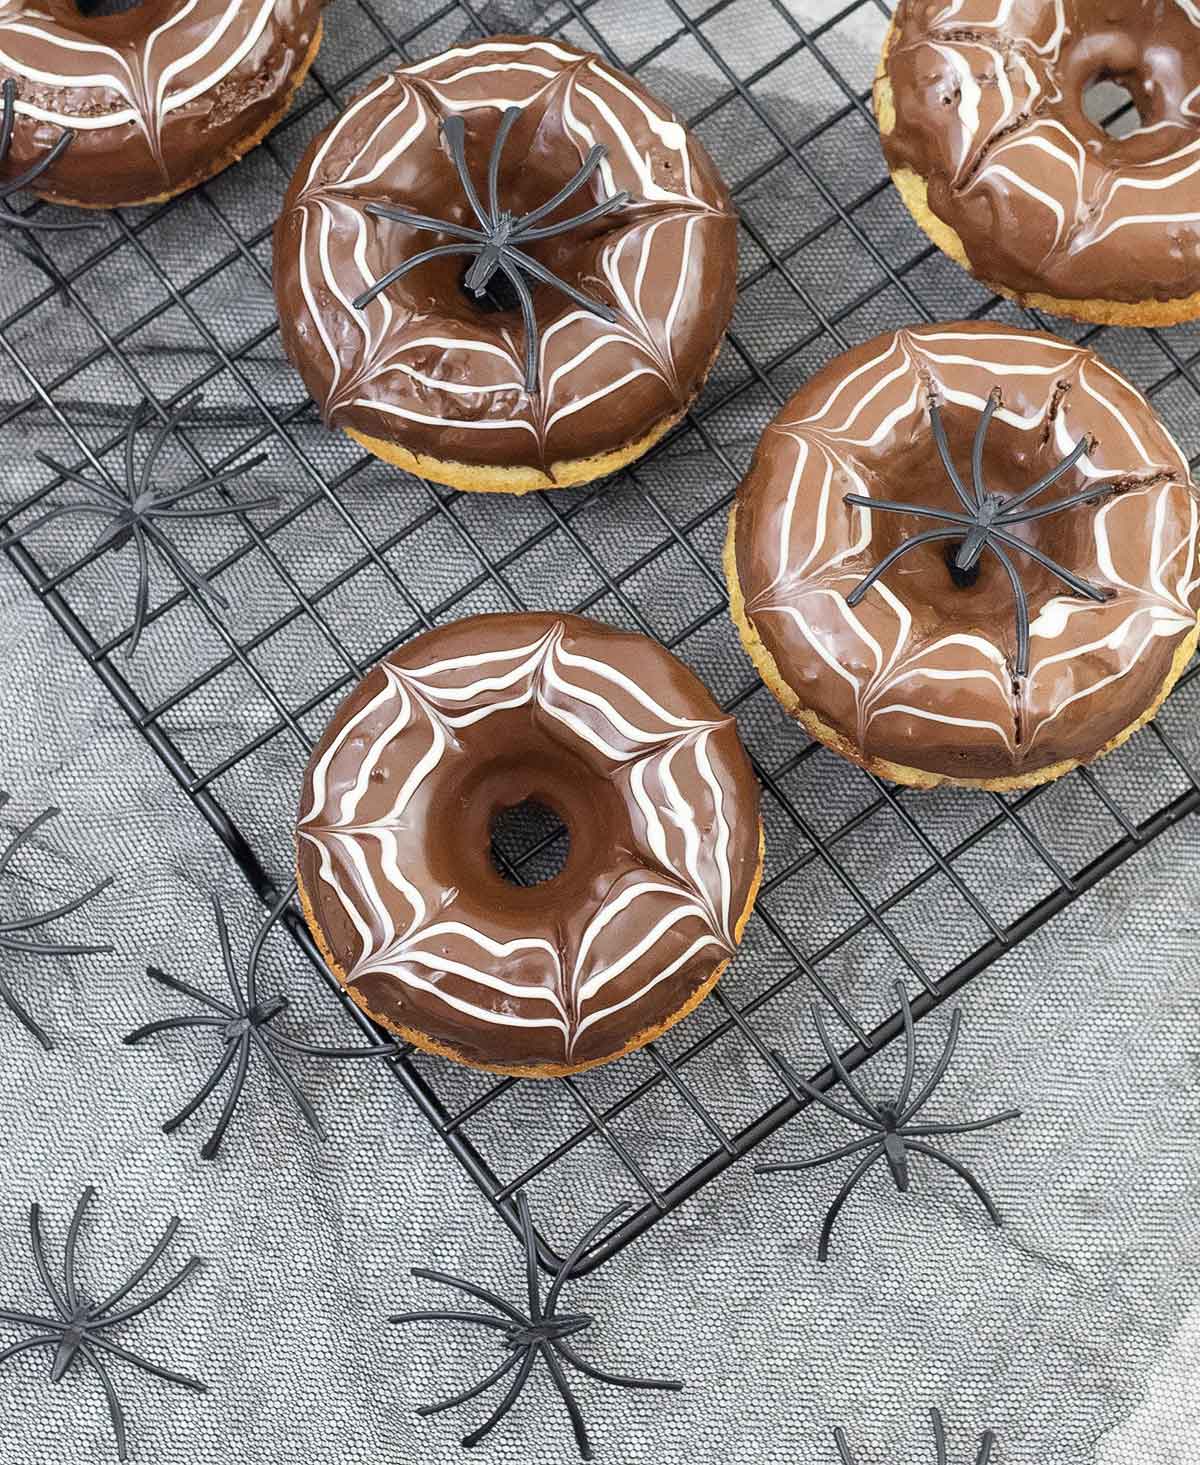 Halloween donuts decorated with spider web made from white and dark chocolate.